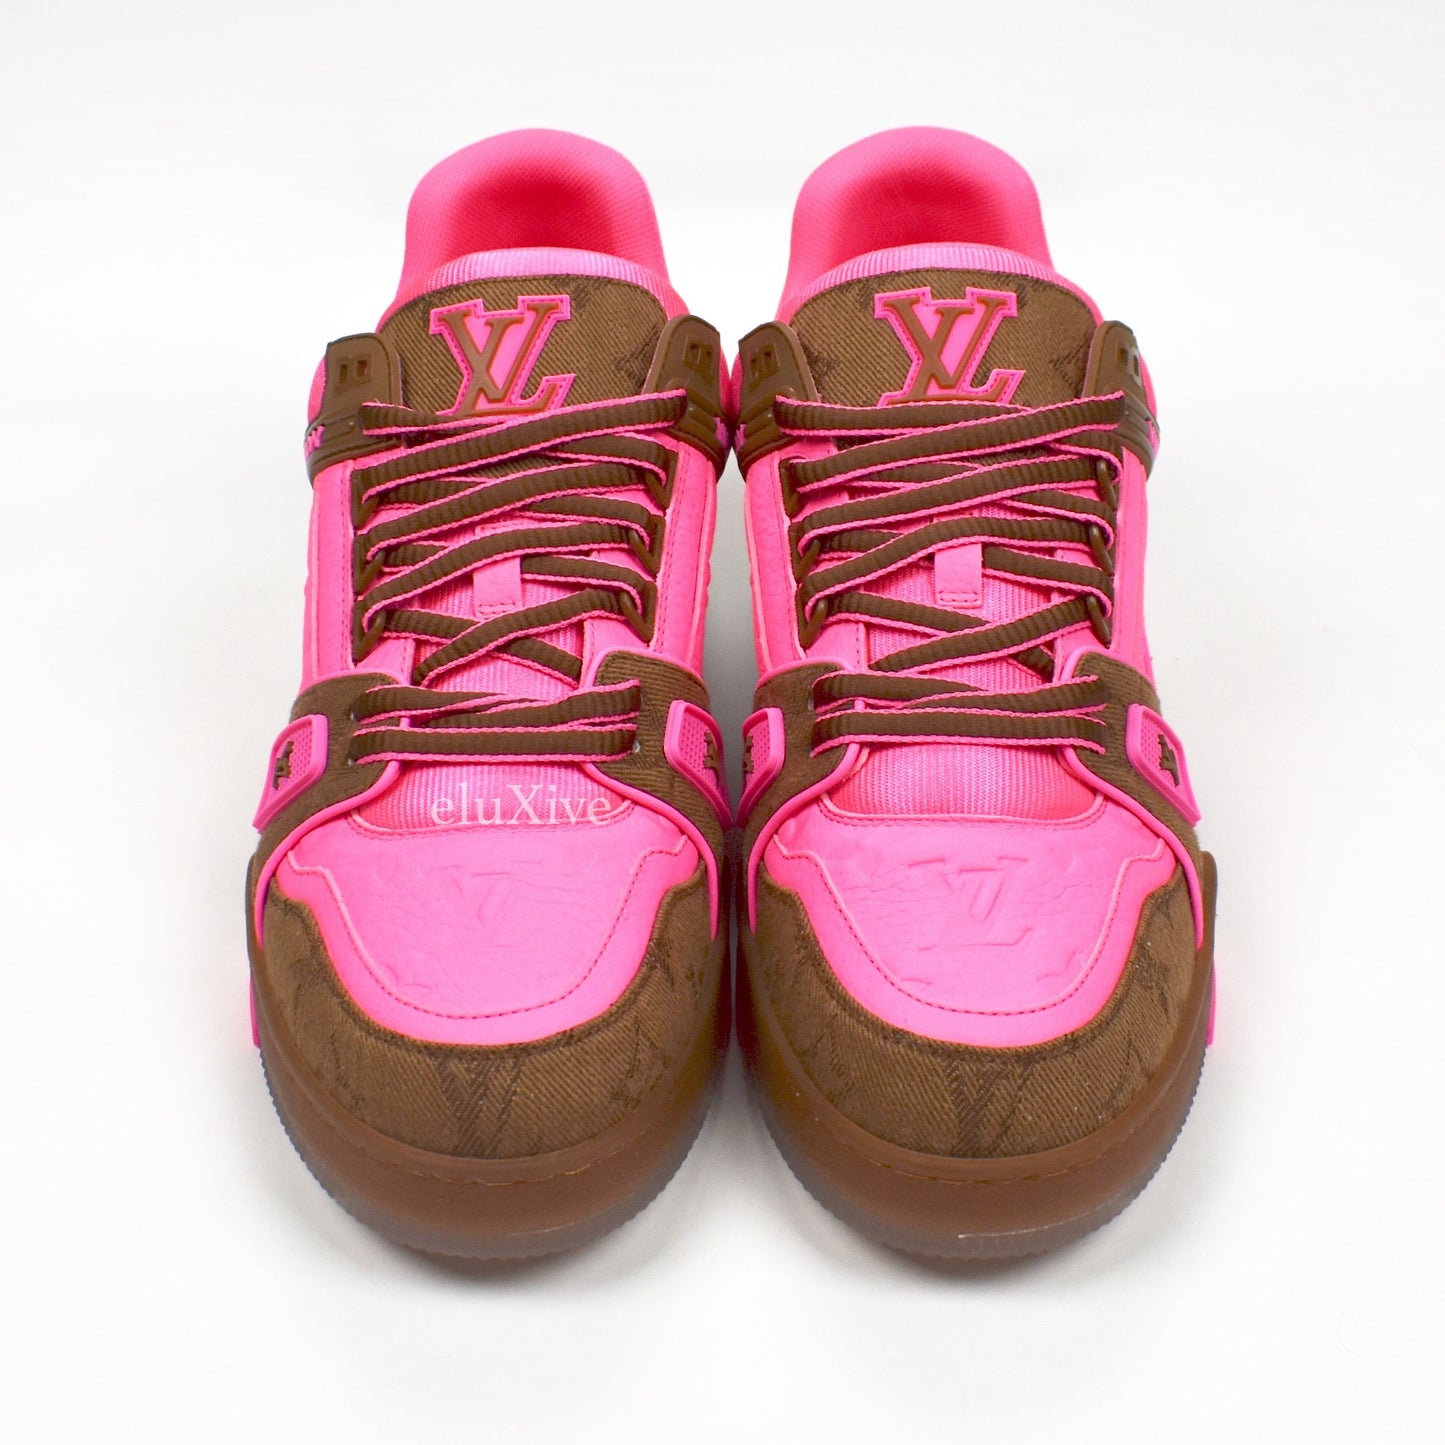 Leather trainers Louis Vuitton Pink size 7.5 UK in Leather - 23522238